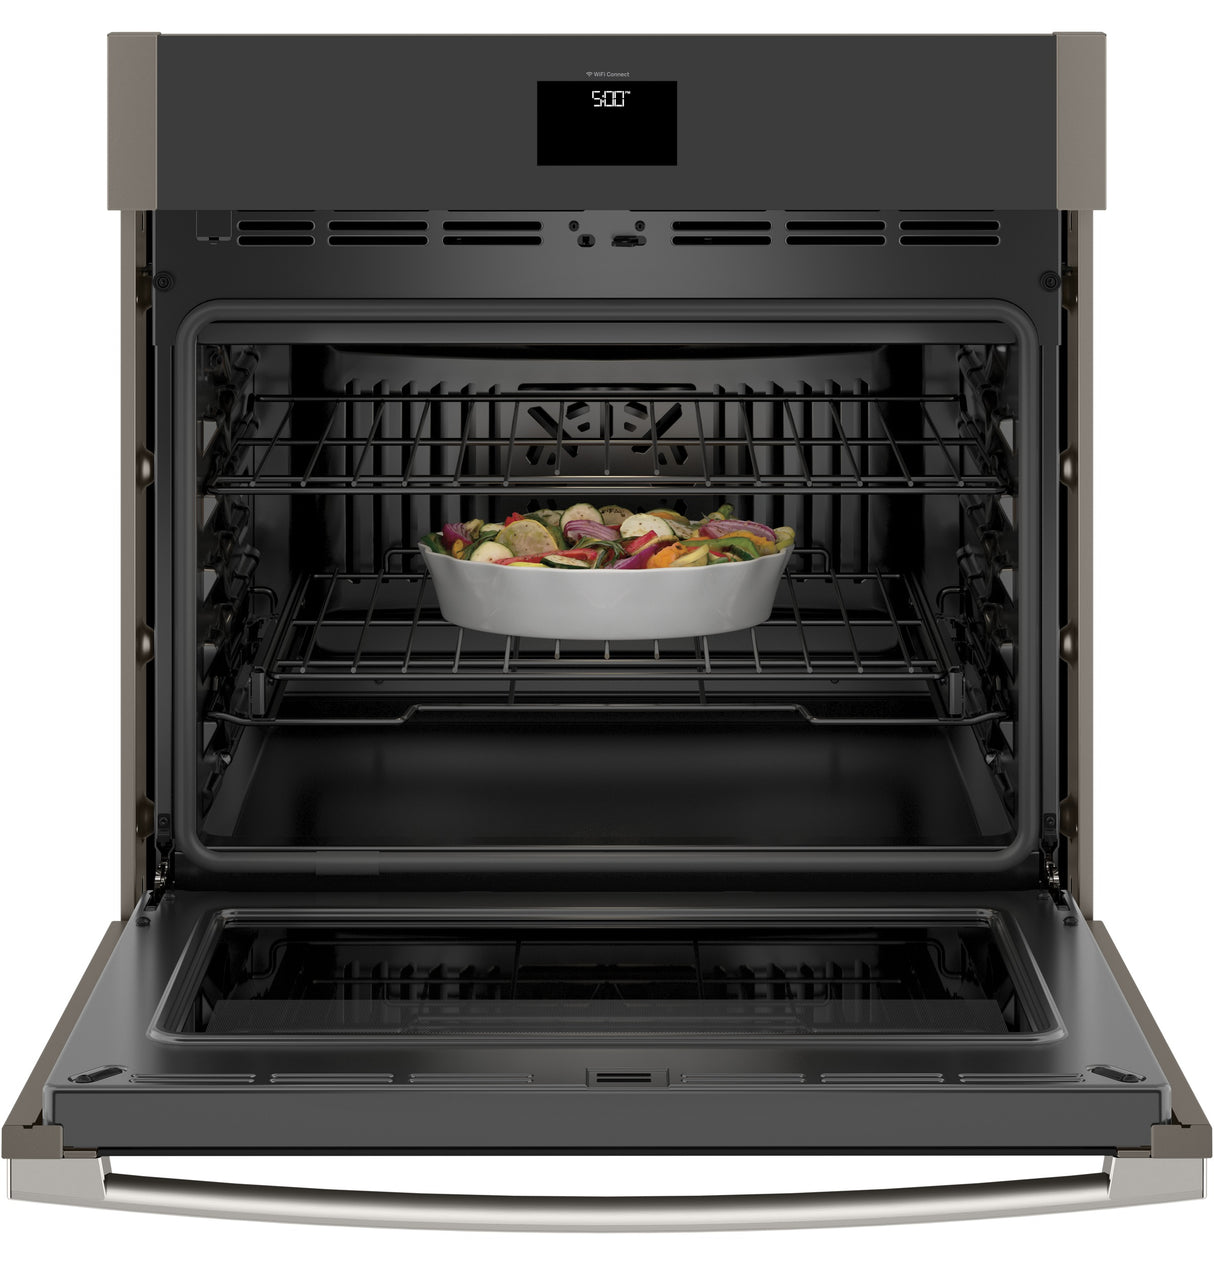 GE(R) 30" Smart Built-In Self-Clean Convection Single Wall Oven with Never Scrub Racks - (JTS5000ENES)